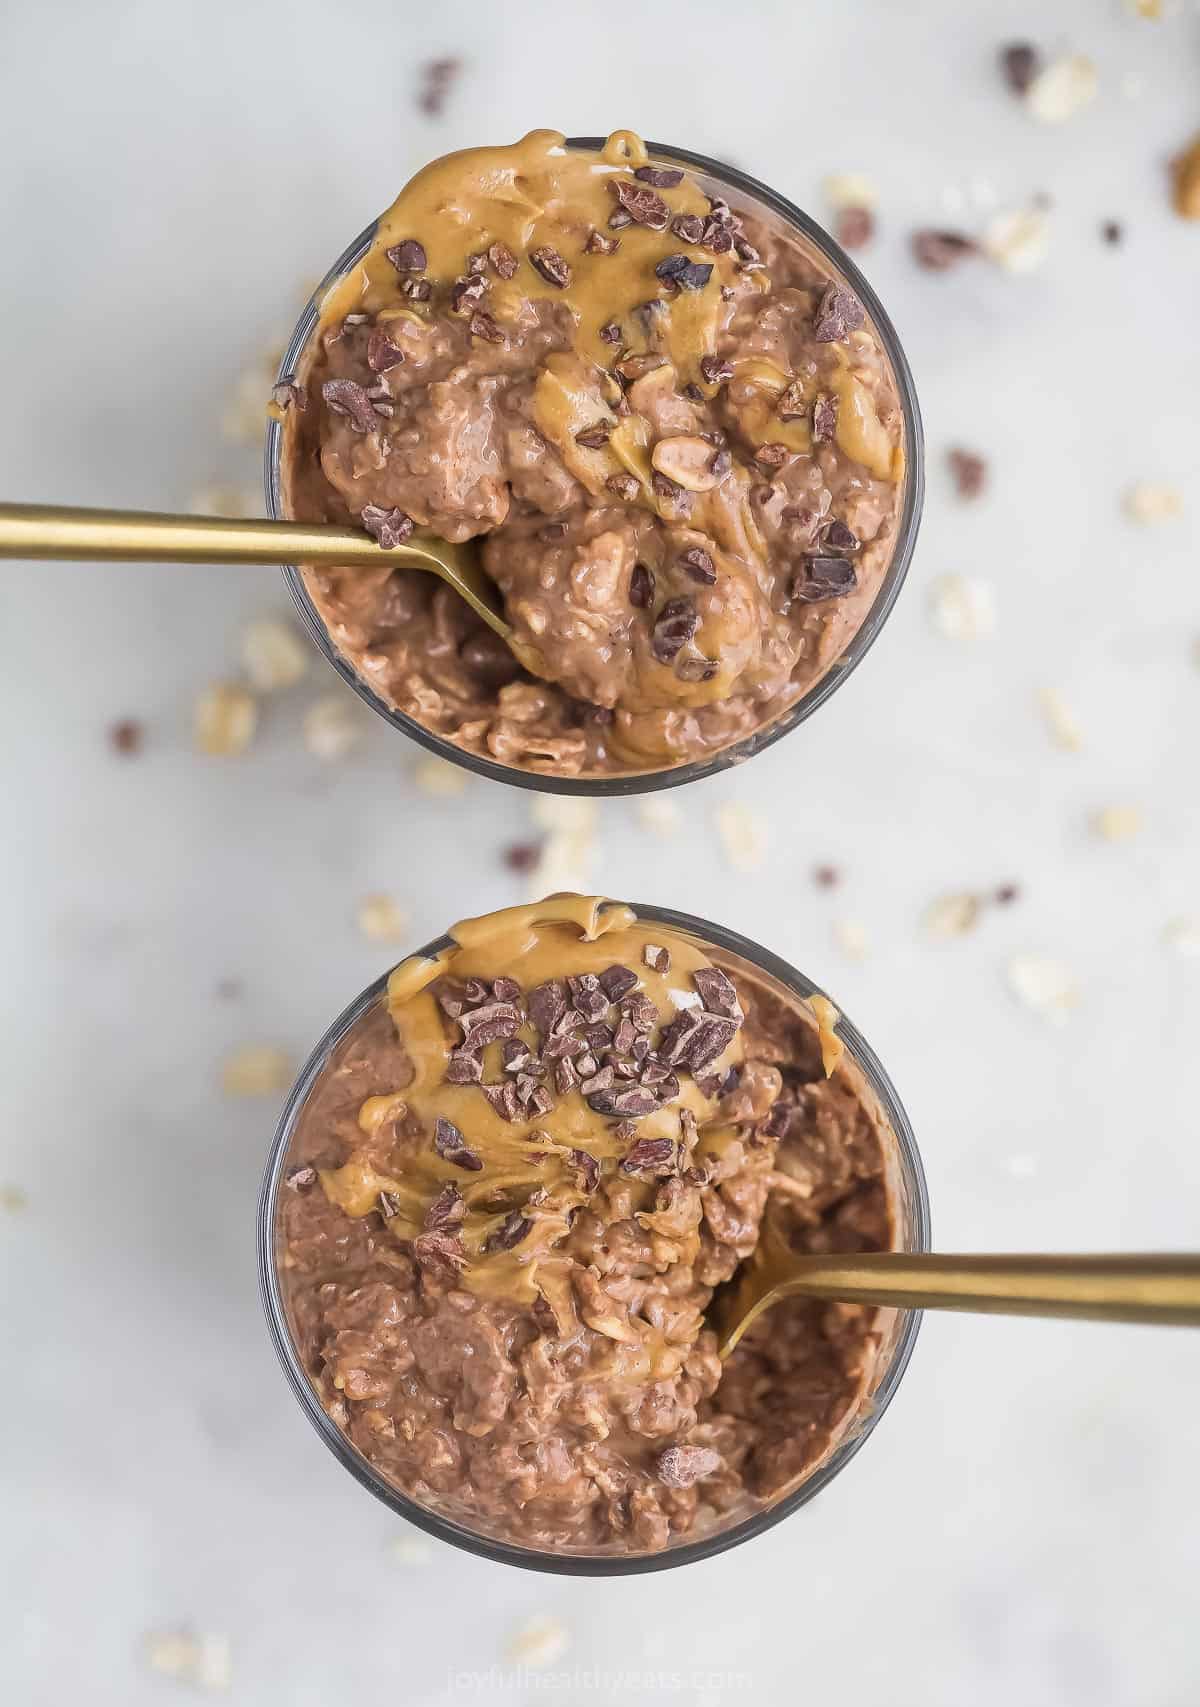 Overhead view of two dishes of chocolate peanut butter overnight oats